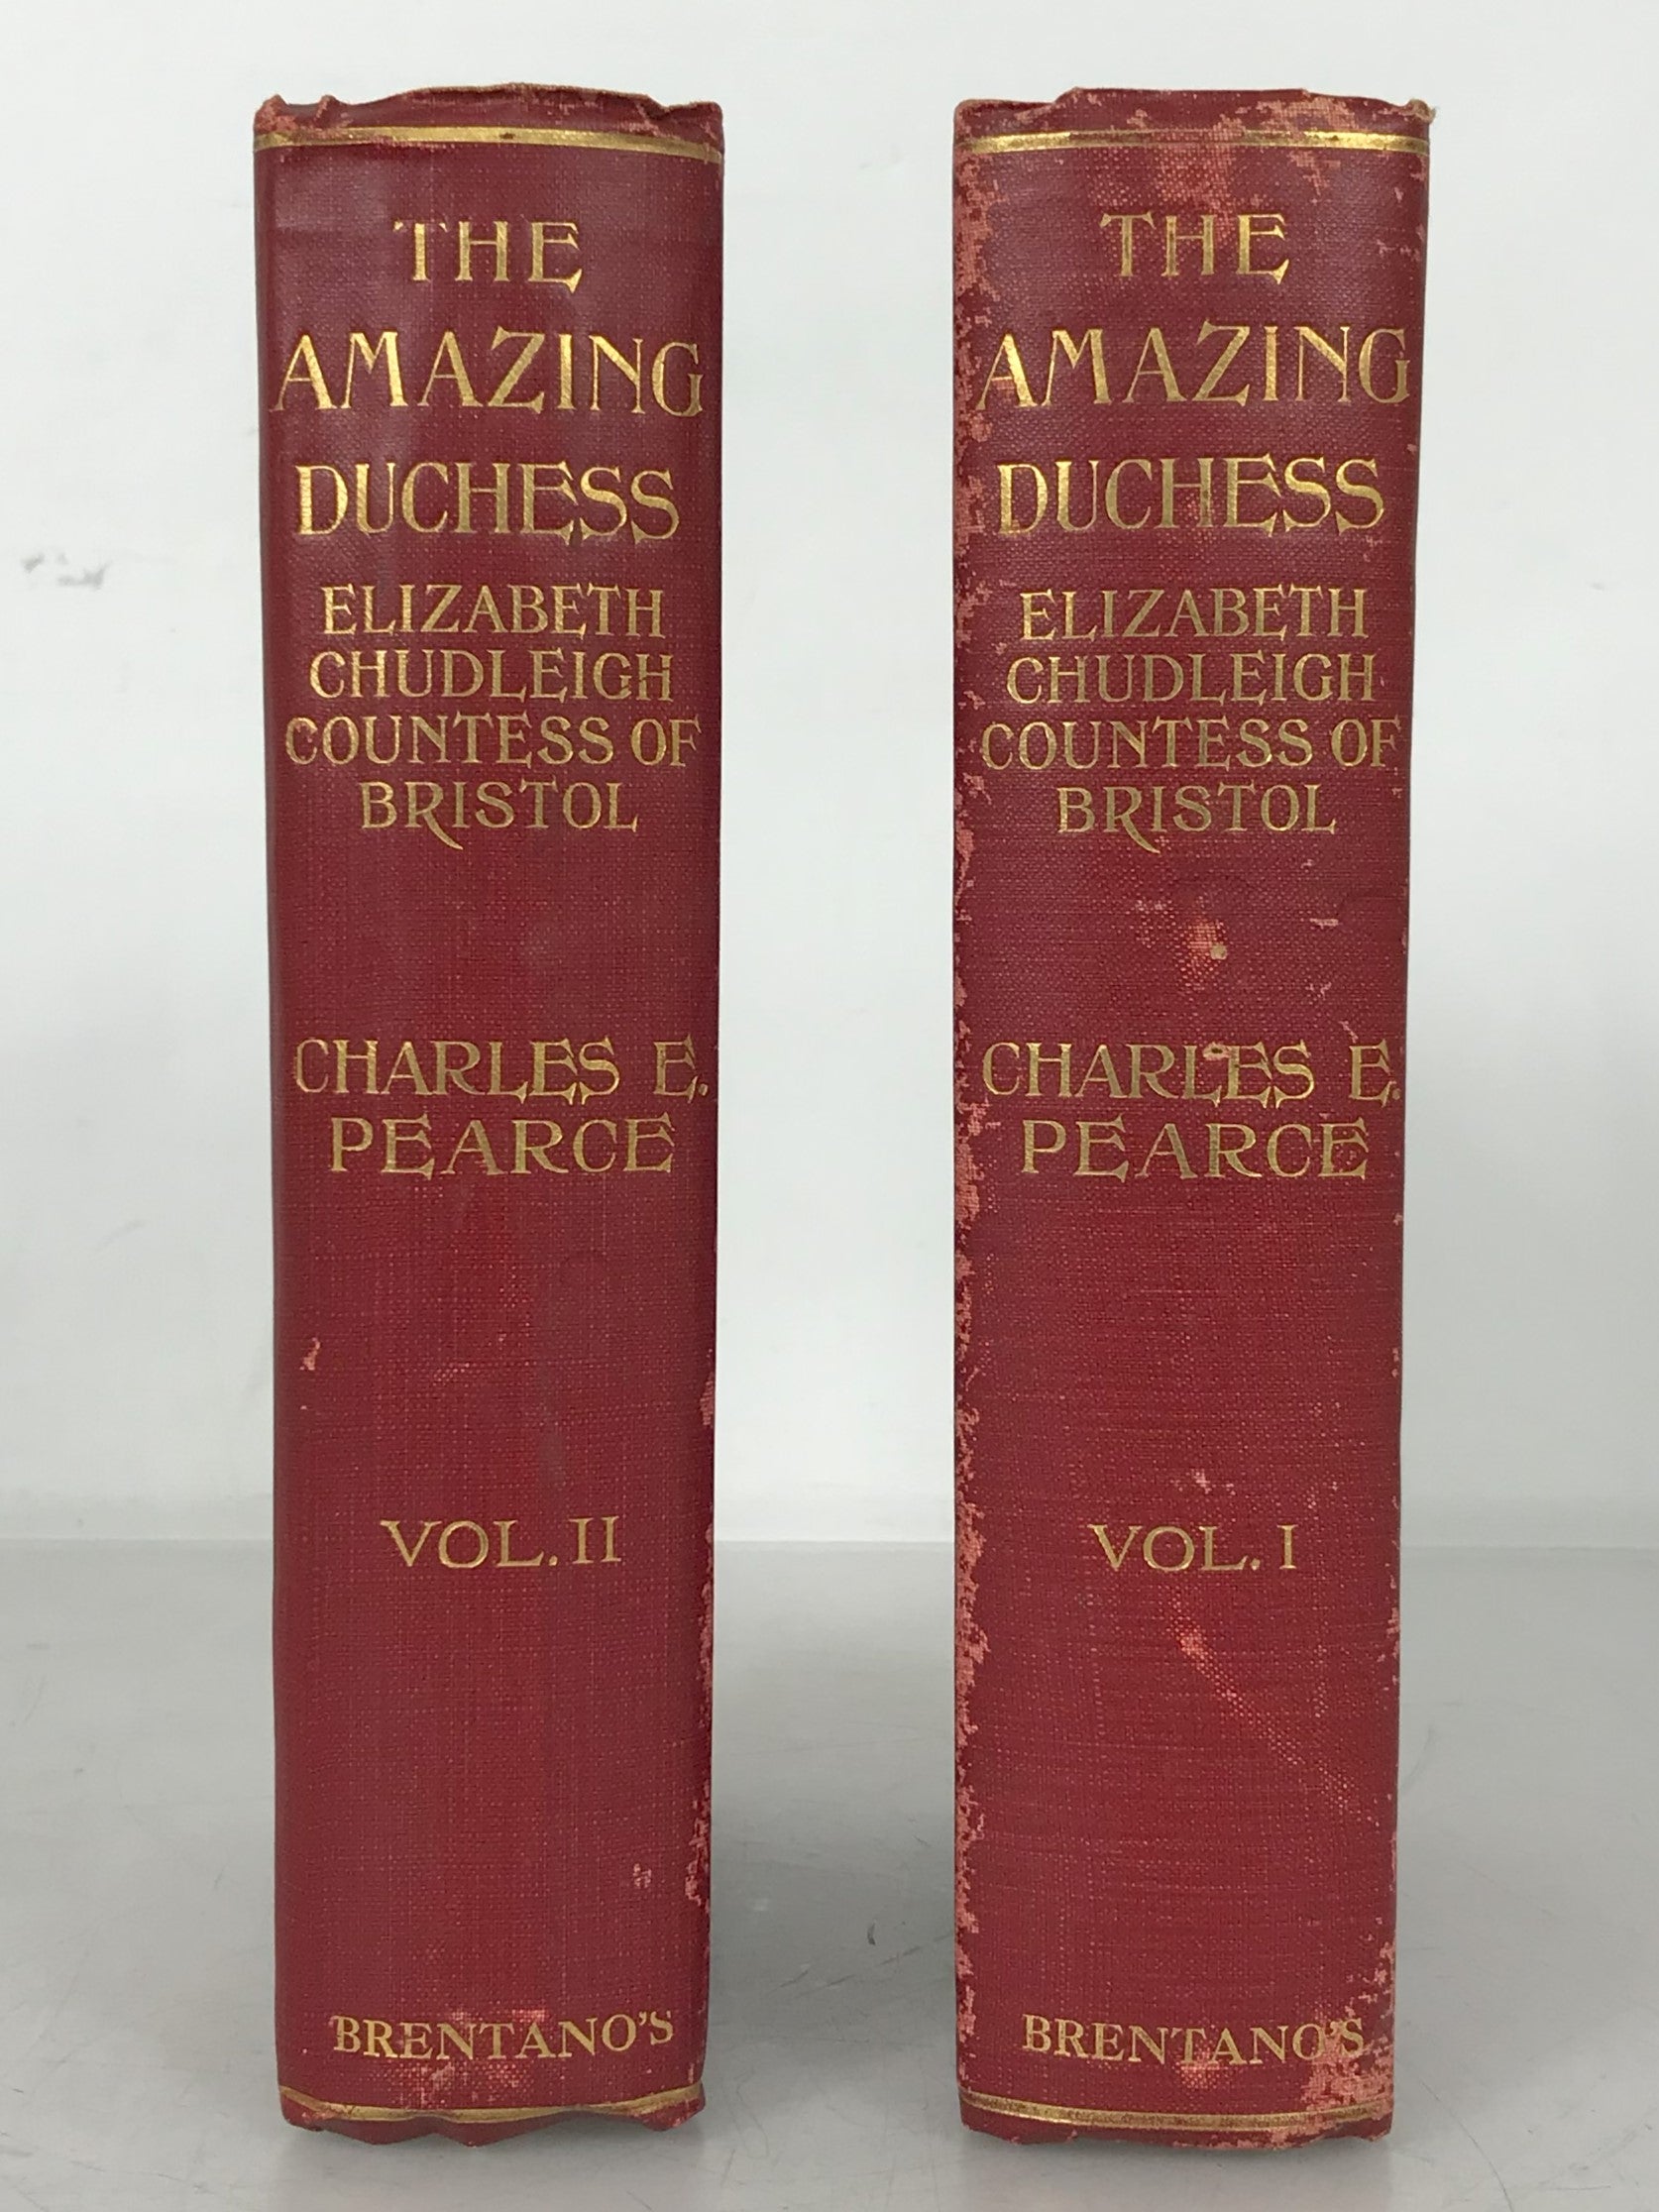 The Amazing Duchess Being the Romantic History of Elizabeth Chudleigh by Charles E Pearce Vol. 1-2 1911